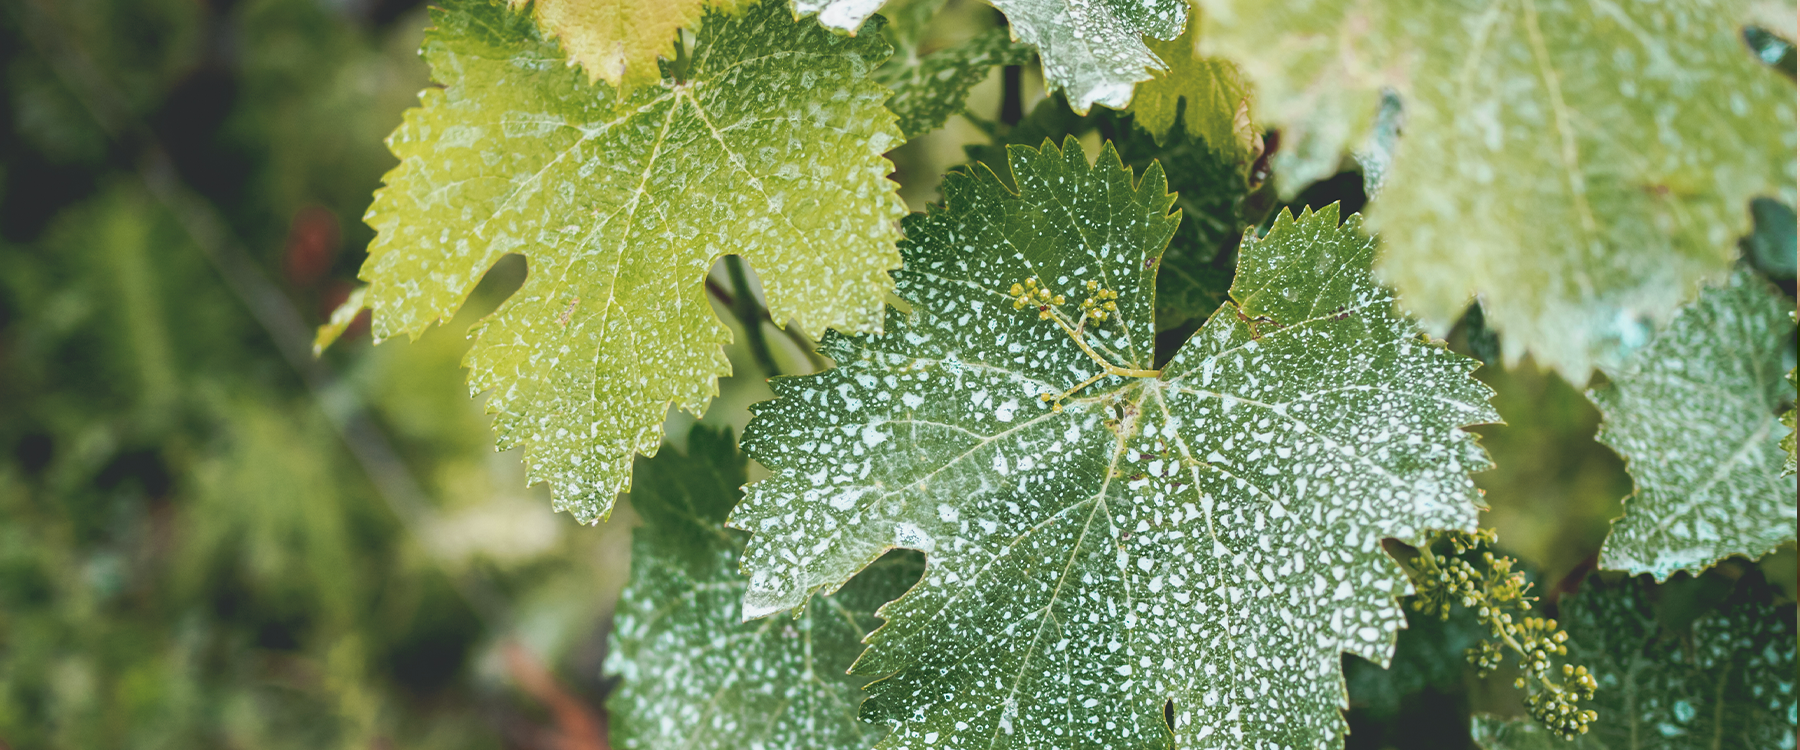 How to Get Rid of Powdery Mildew